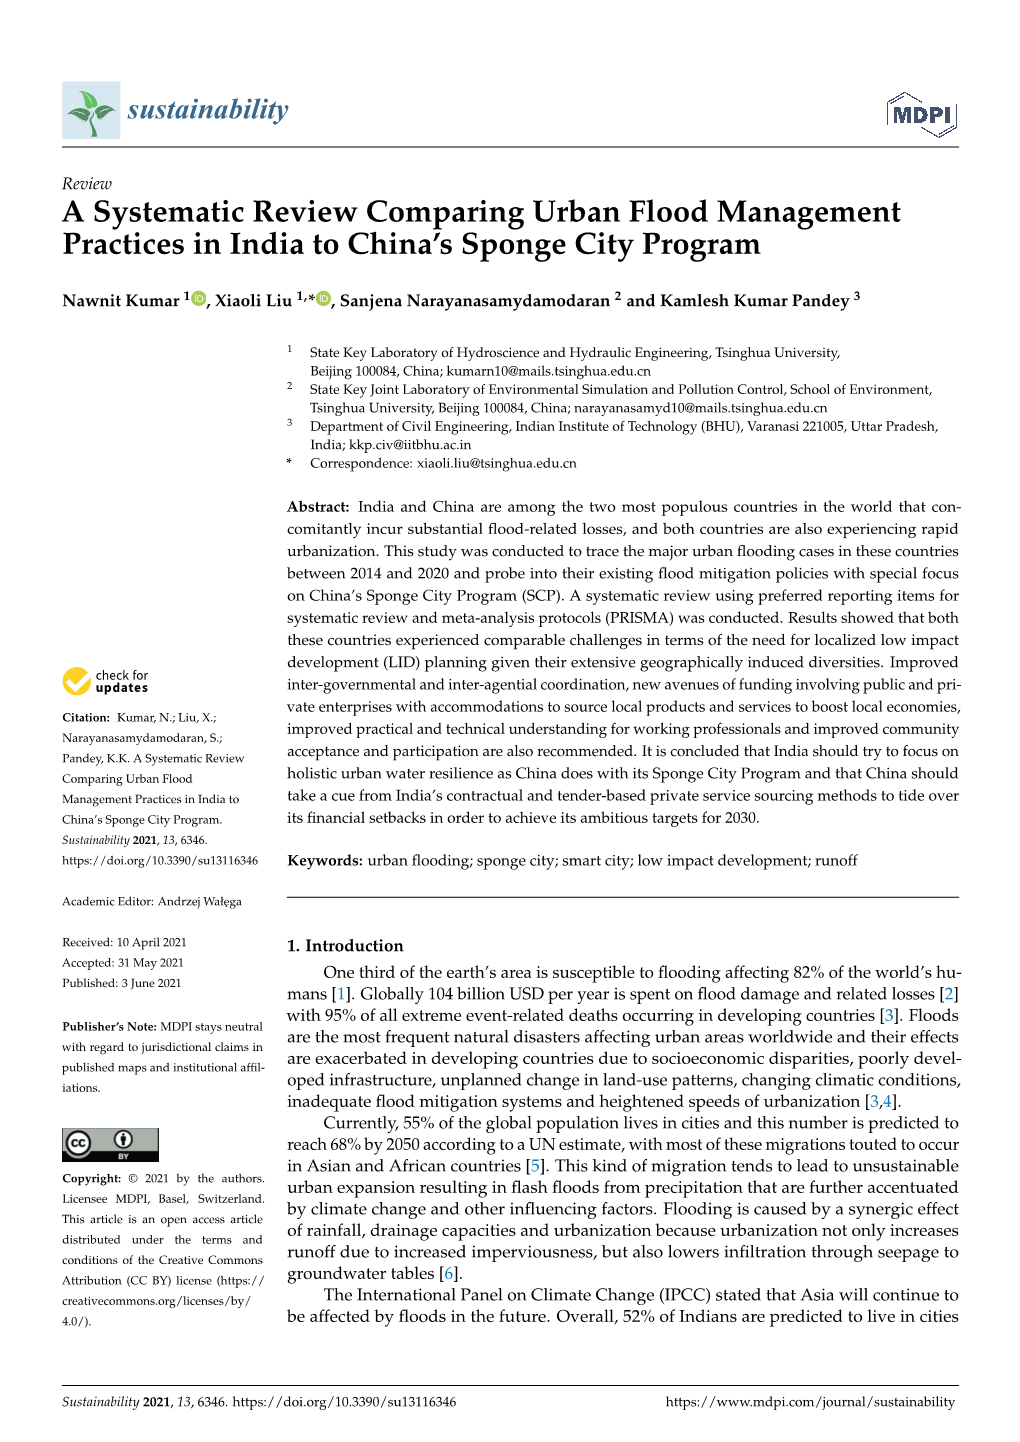 A Systematic Review Comparing Urban Flood Management Practices in India to China's Sponge City Program